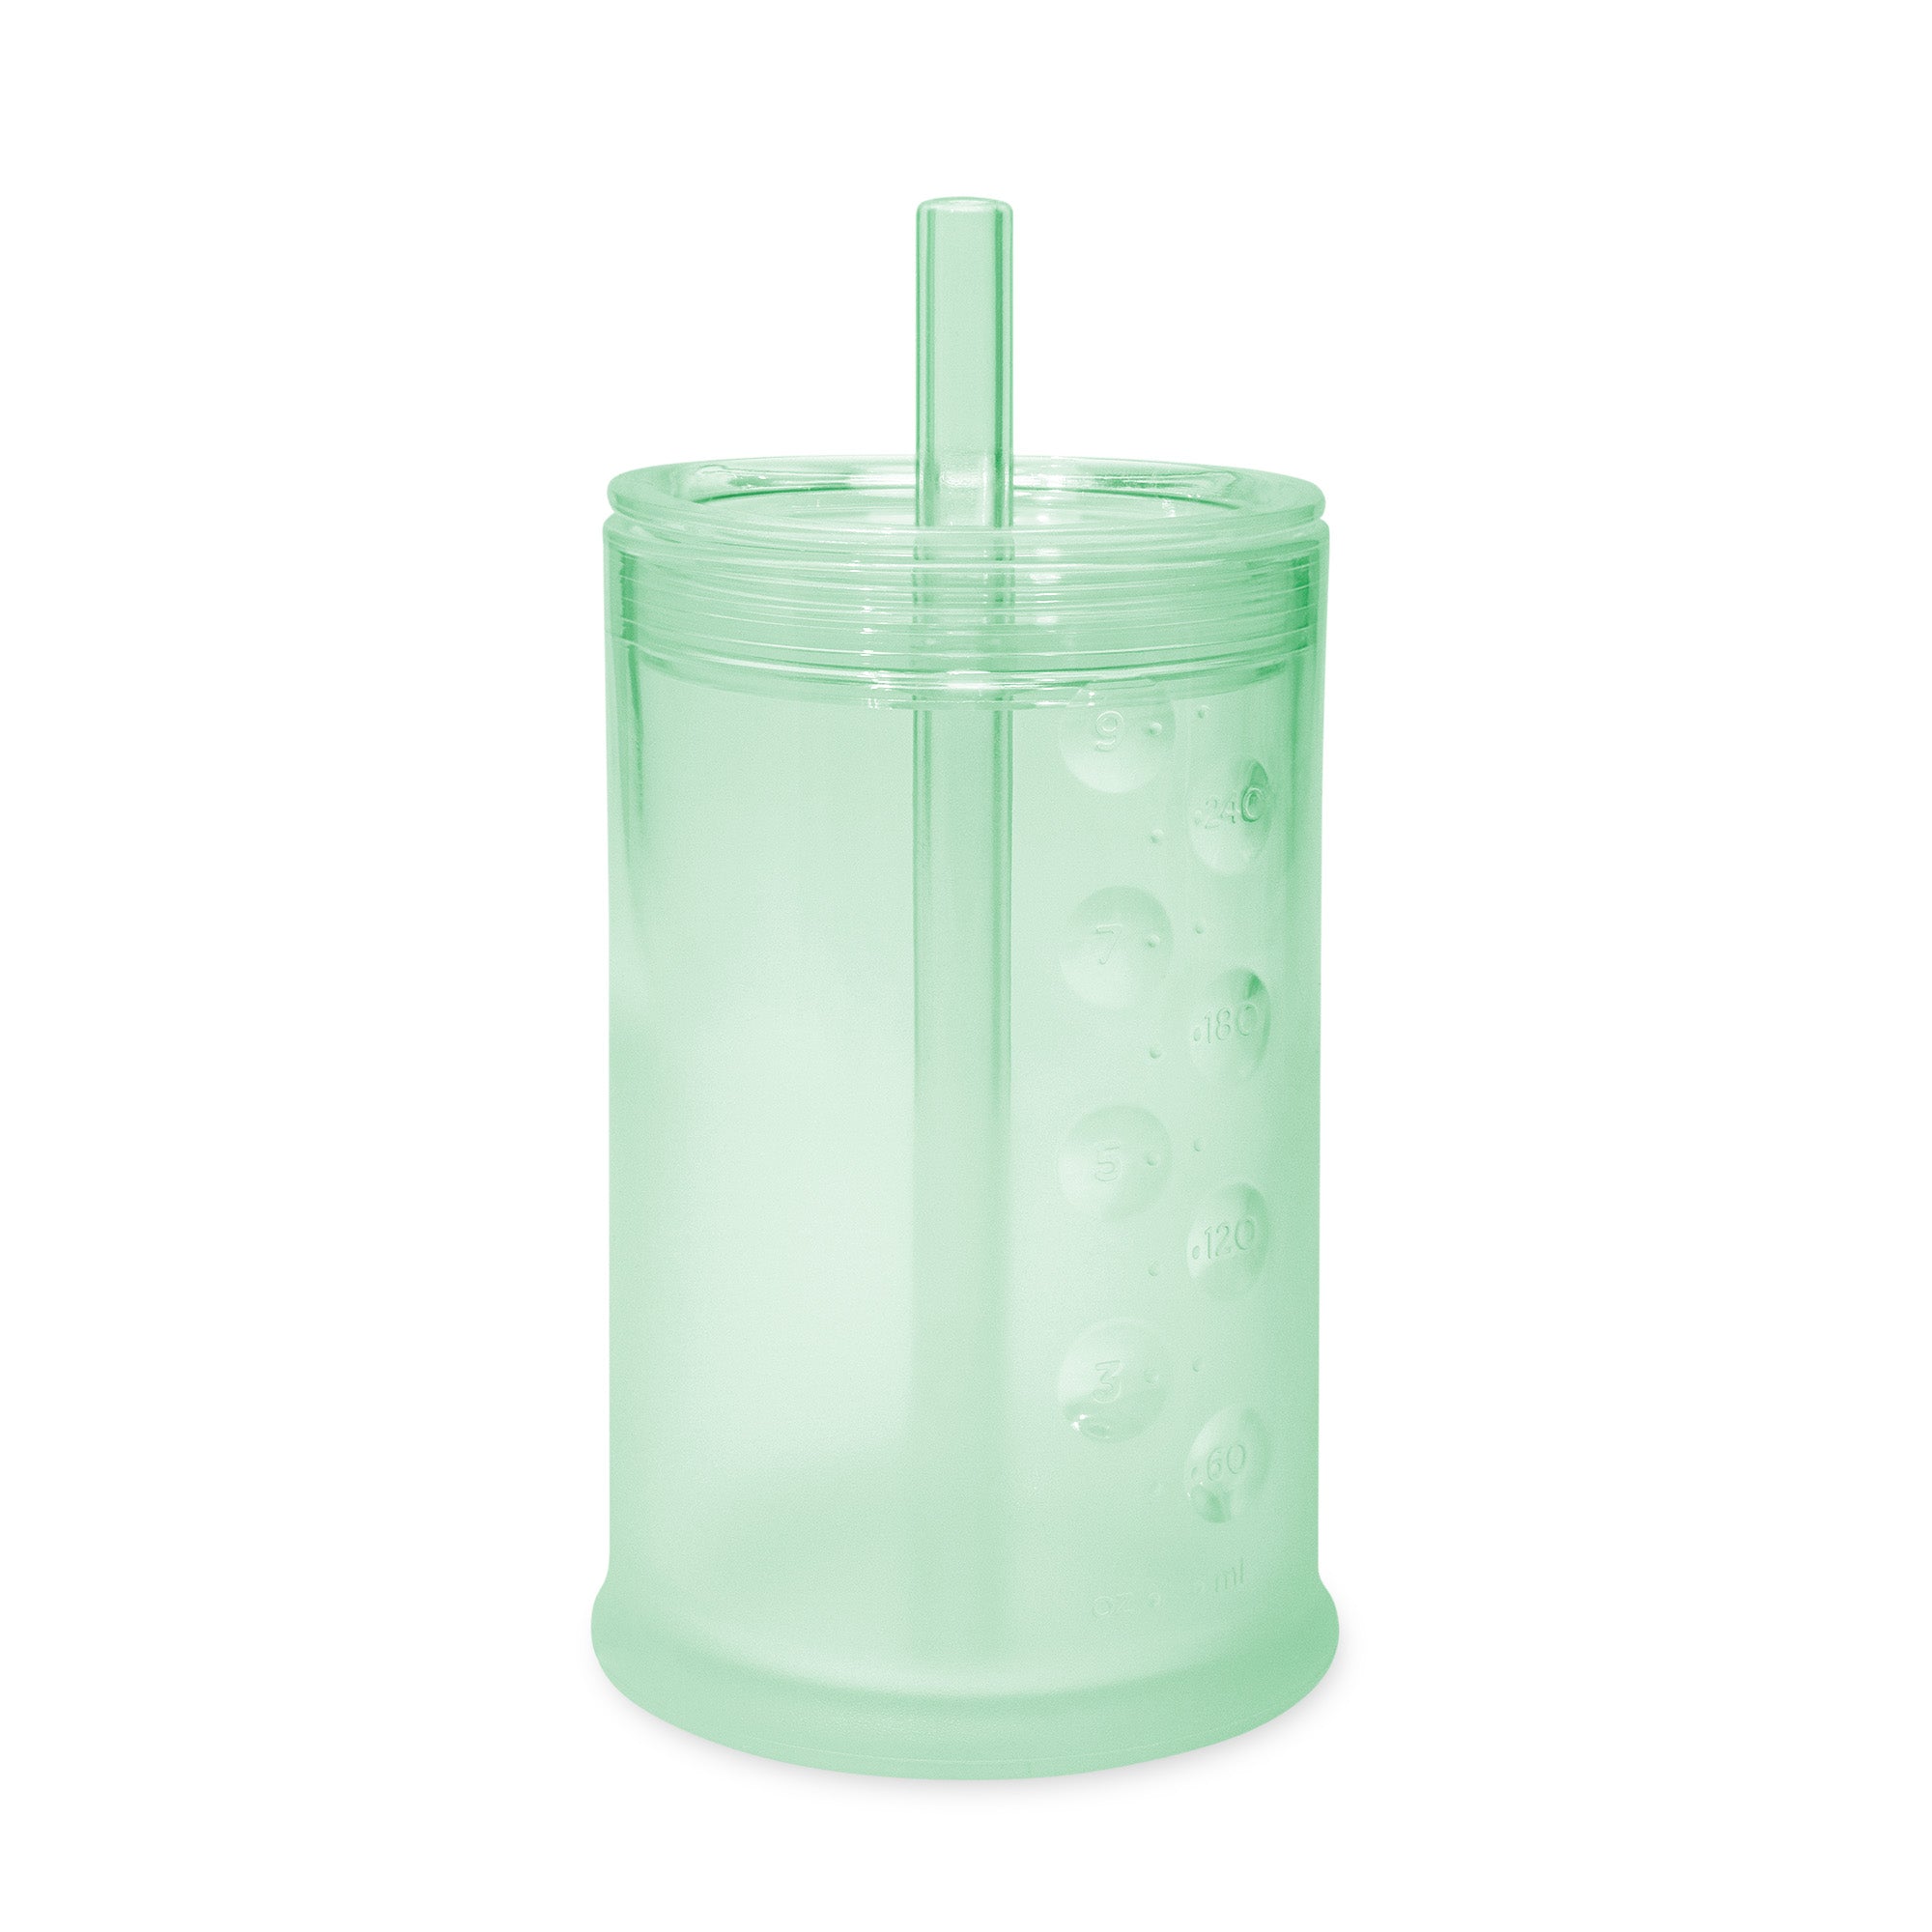 3-in-1 Bpa-free Silicone Training Cup With Straw Lid Handle For